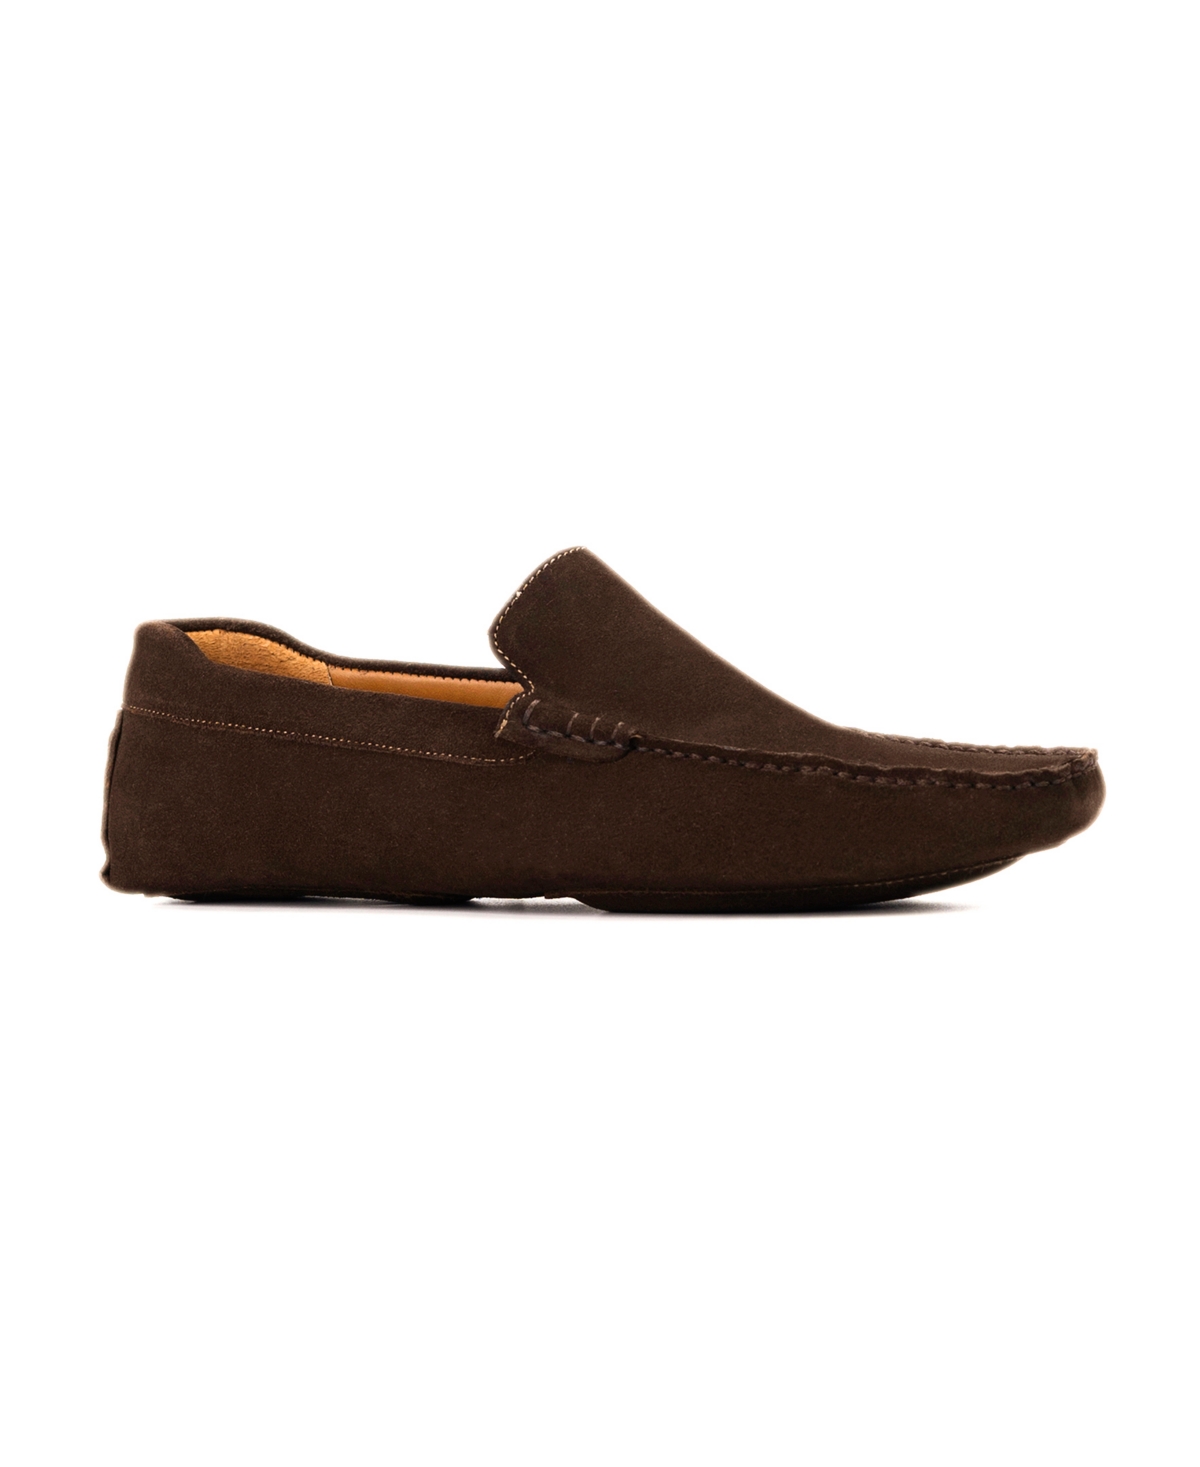 Anthony Veer Men's William House All Suede for Home Loafers Men's Shoes